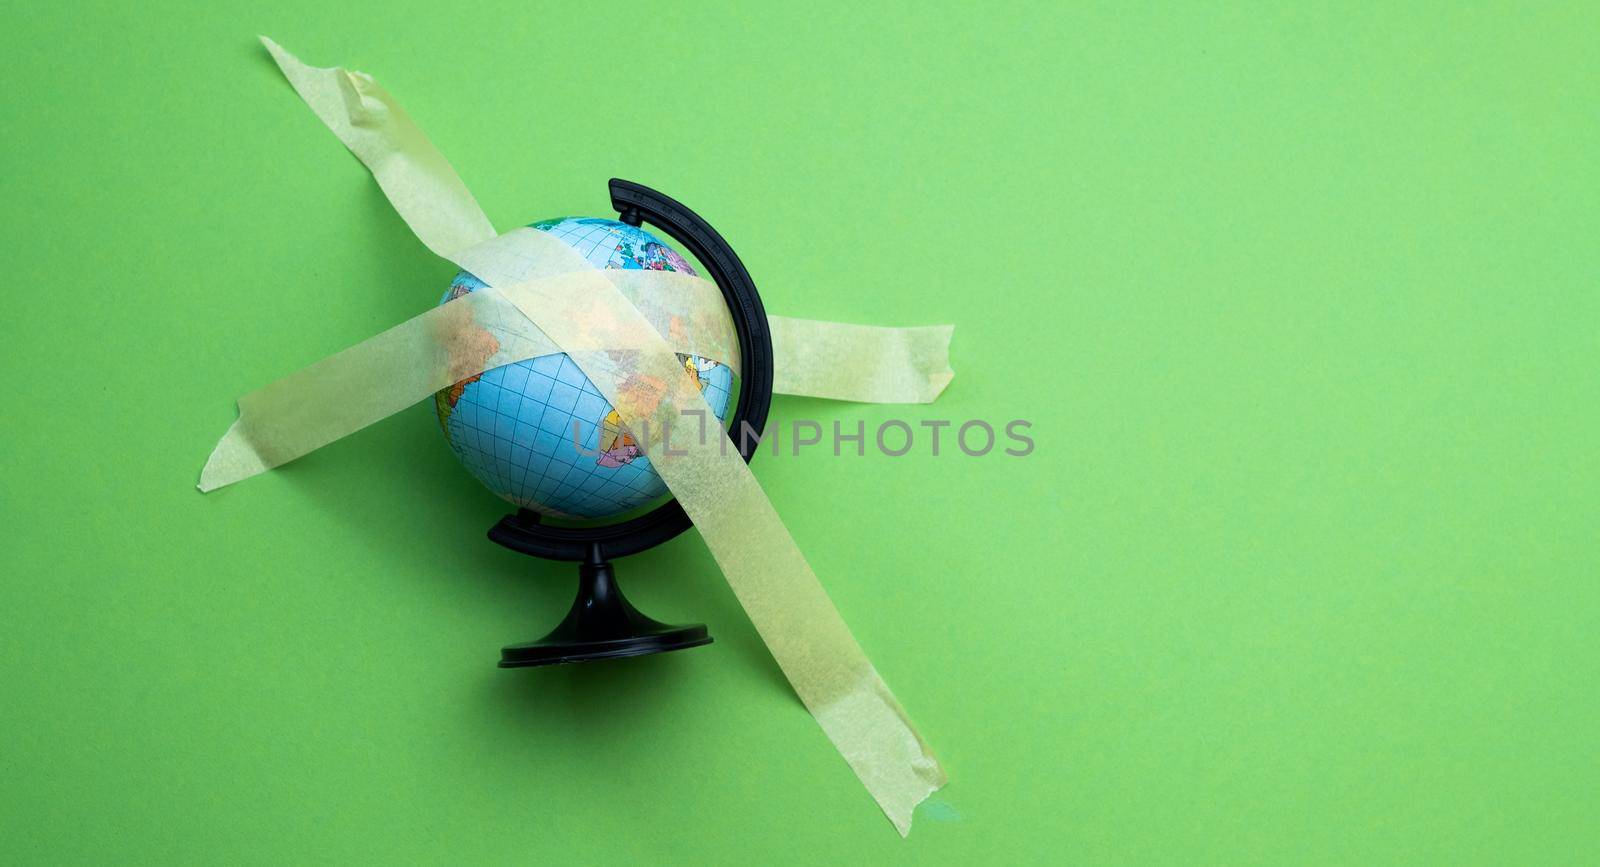 The globe sticked up with masking tape isolated on green background wit copyspace. World epidemic concept with stopped tourism and travel. Abstract symbol of closed country borders for travellers